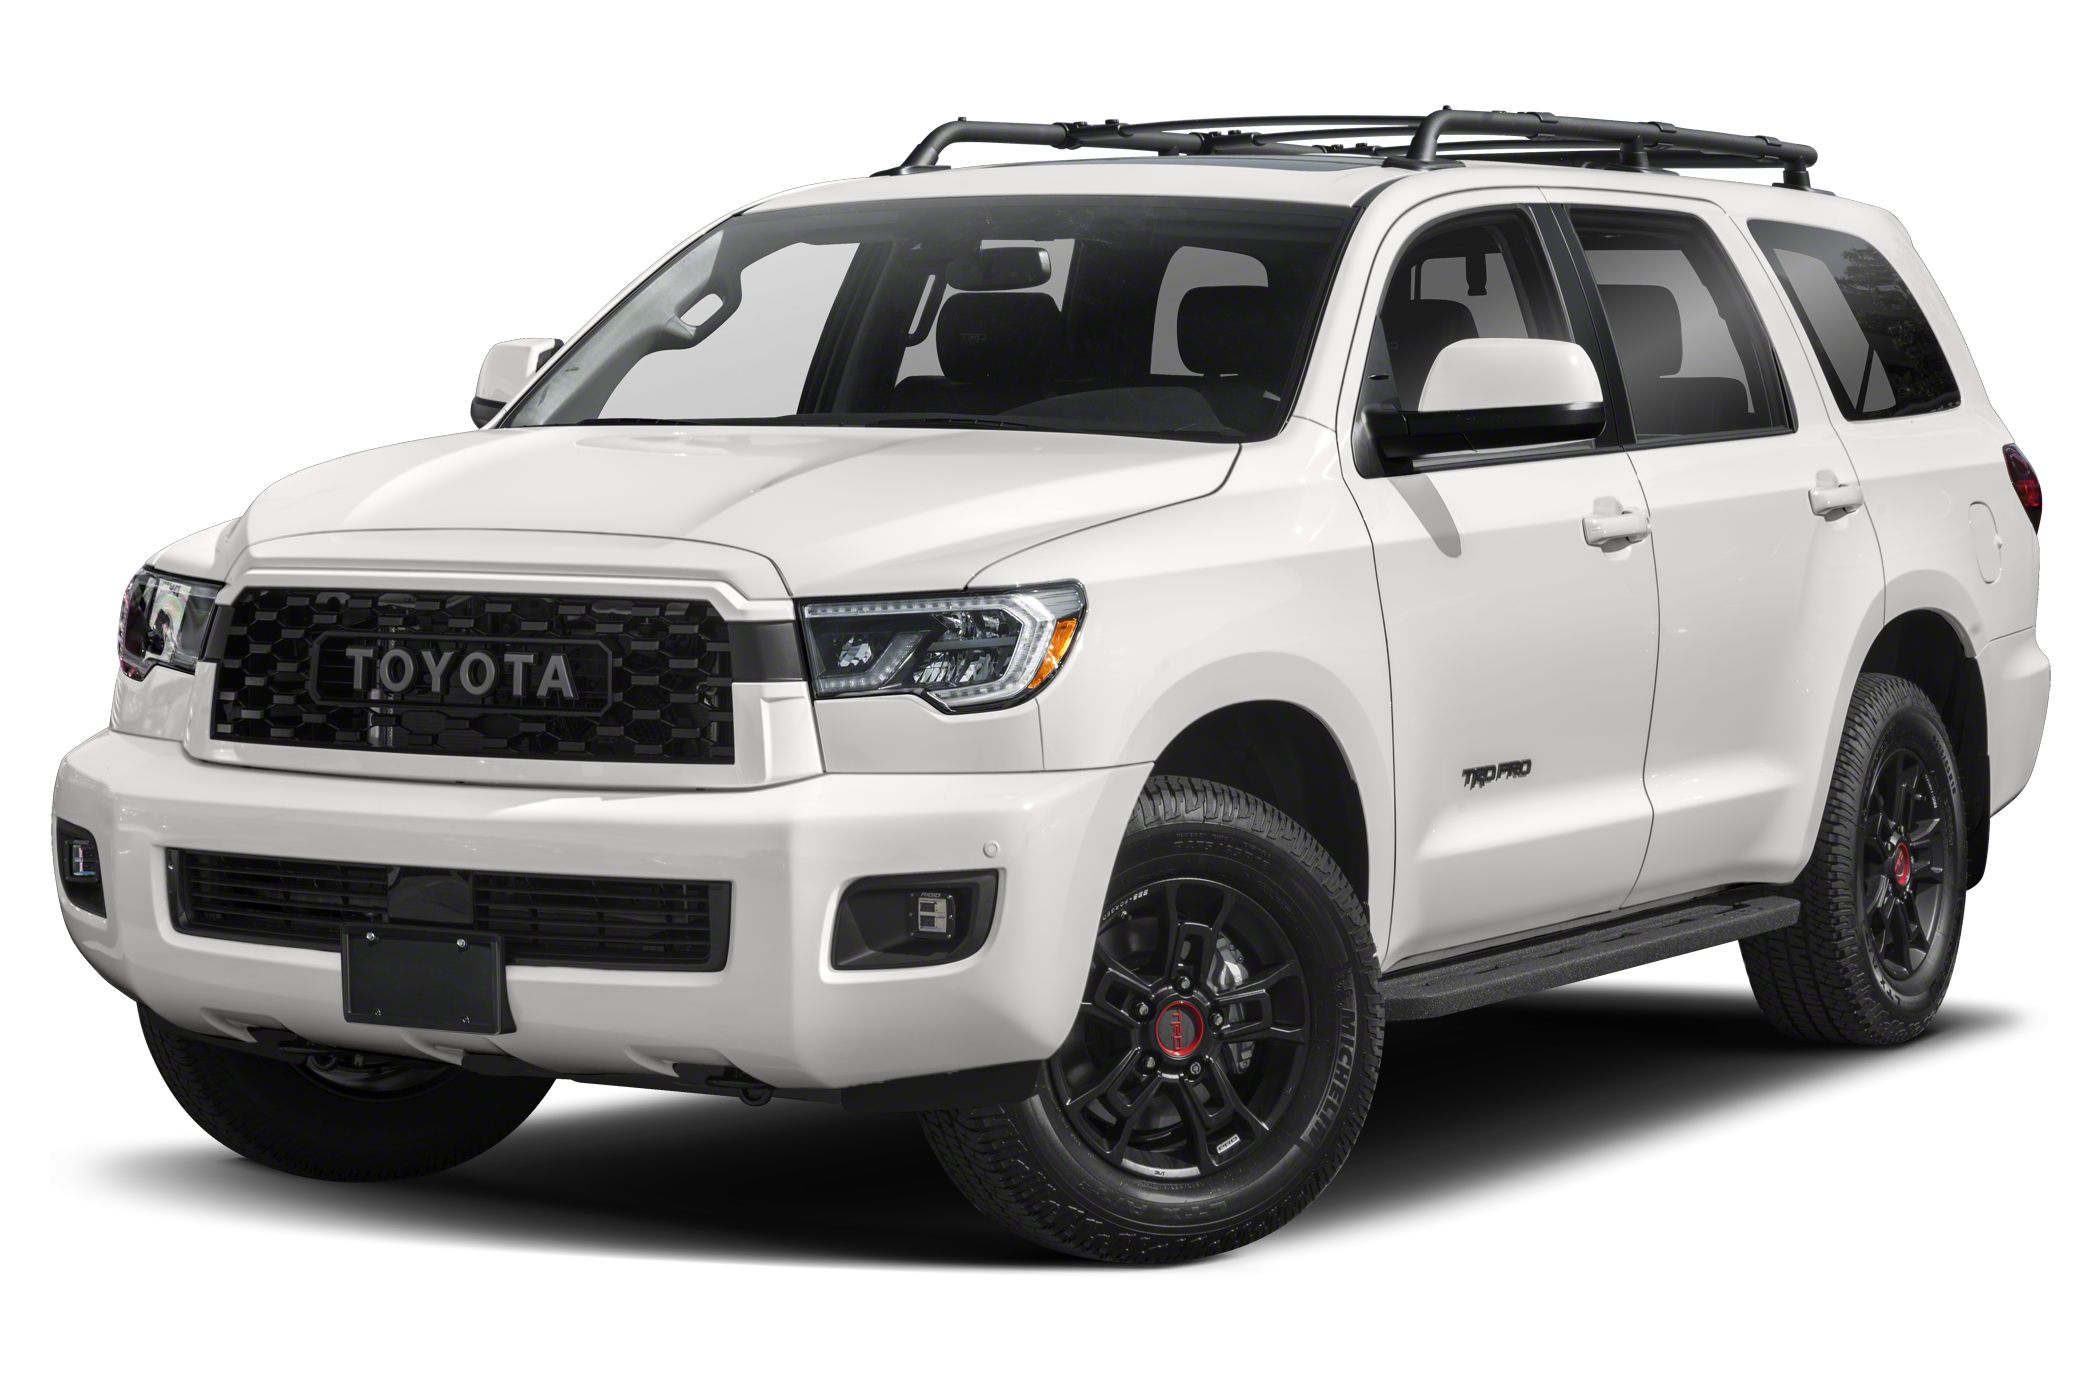 2021 Toyota Sequoia oem parts and accessories on sale